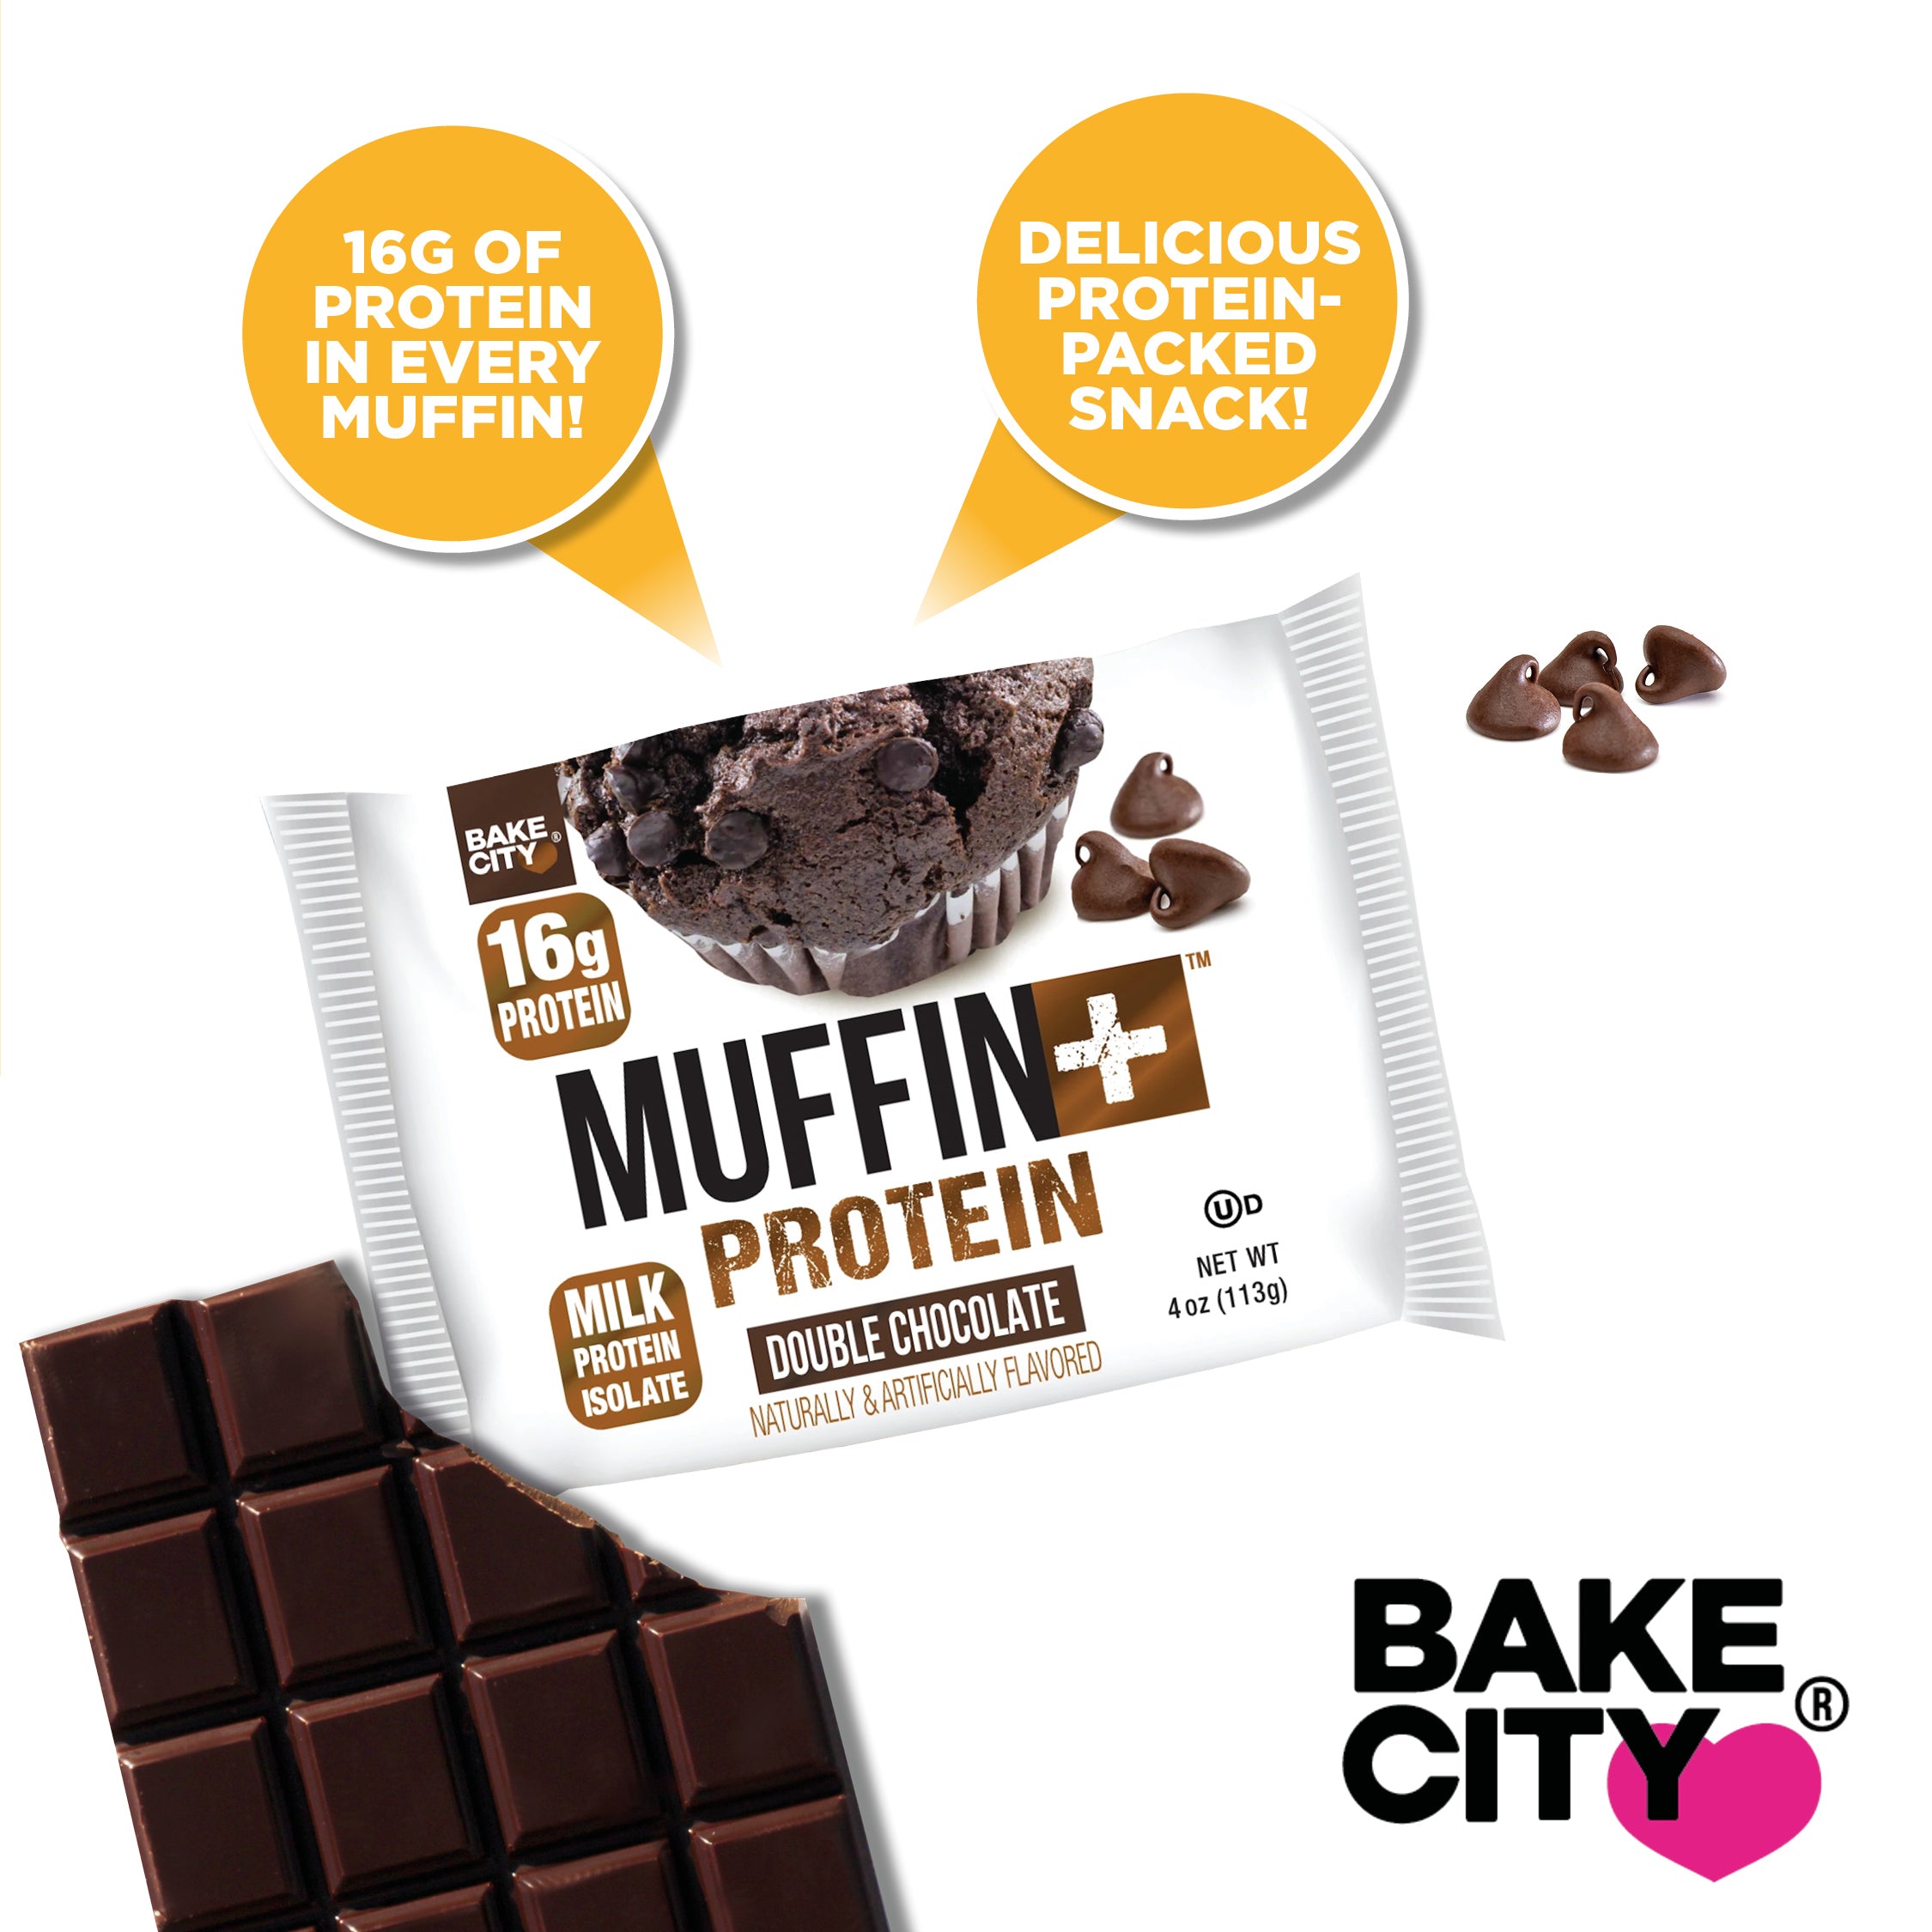 Muffin+ Protein Double Chocolate - Bake City USA